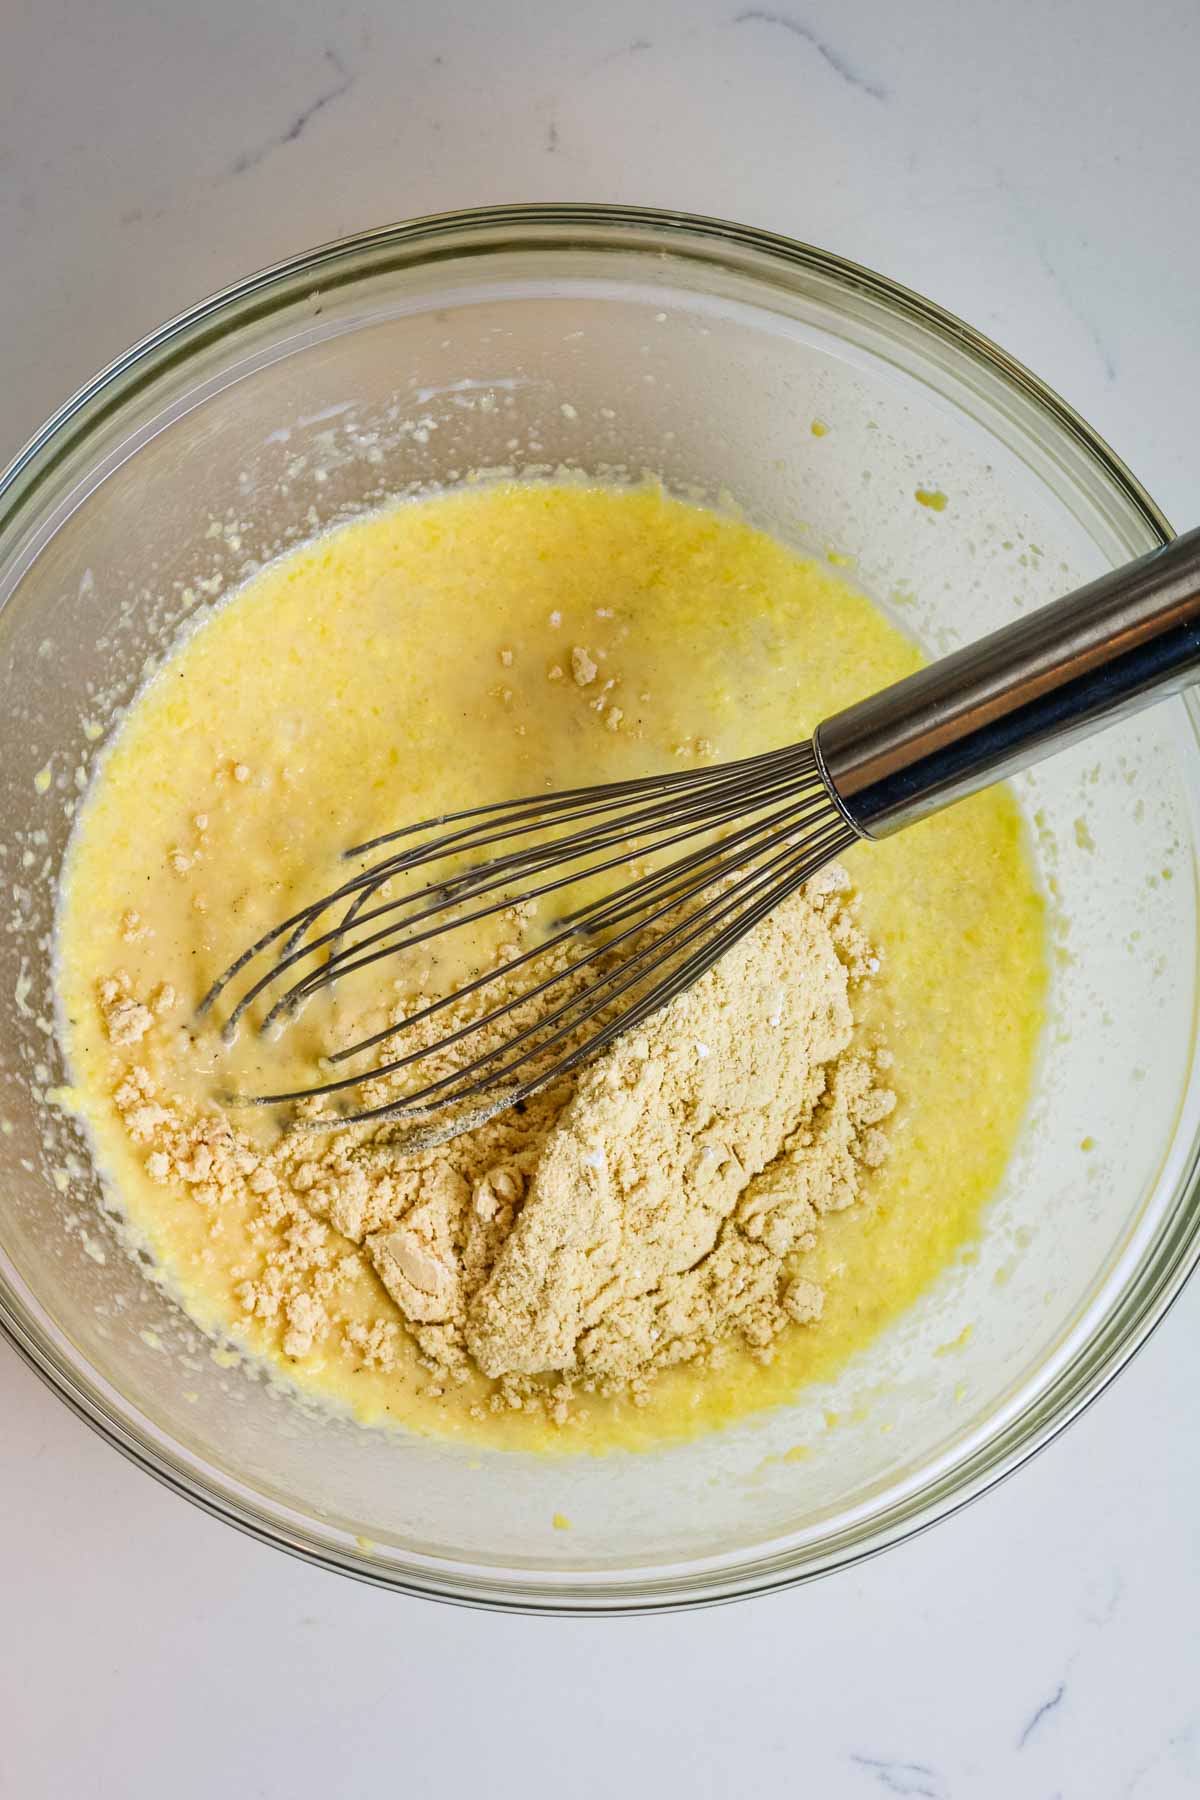 metal whisk in a bowl of butter and other ingredients to make oatmeal bars